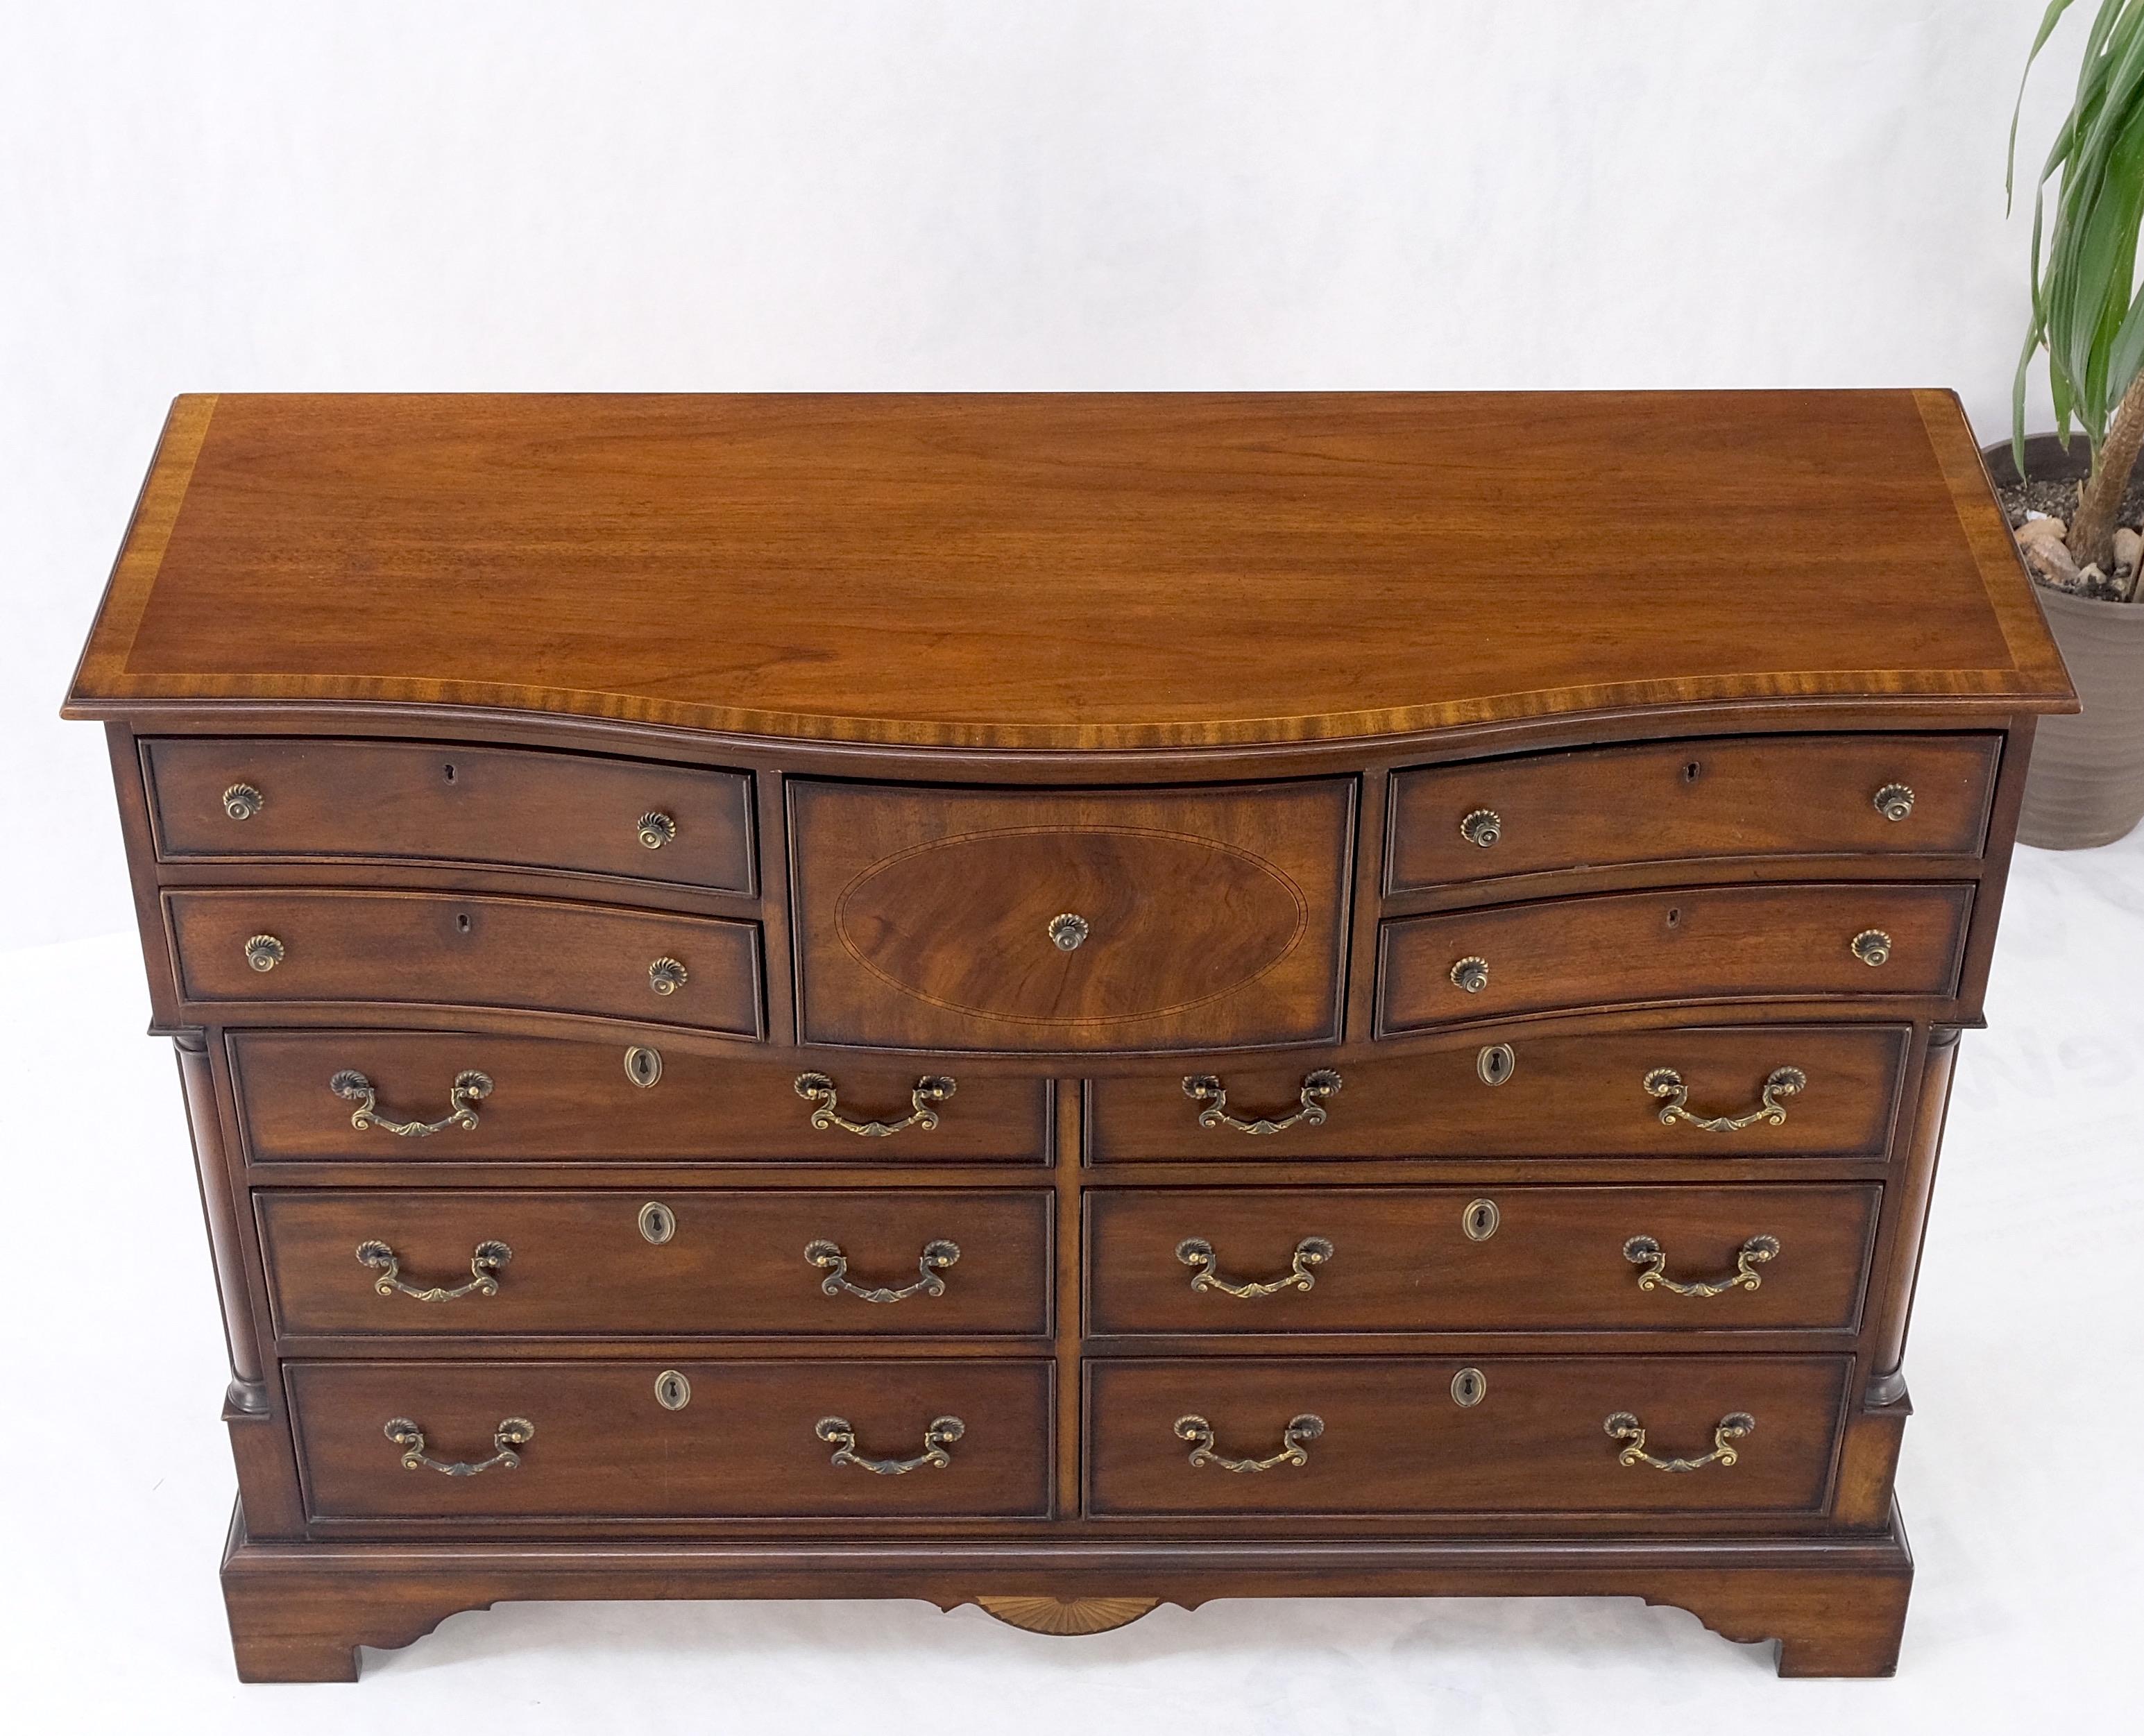 Banded Top Mahogany Inlayed Bracket Feet 11 Drawers Dresser Credenza MINT! For Sale 8